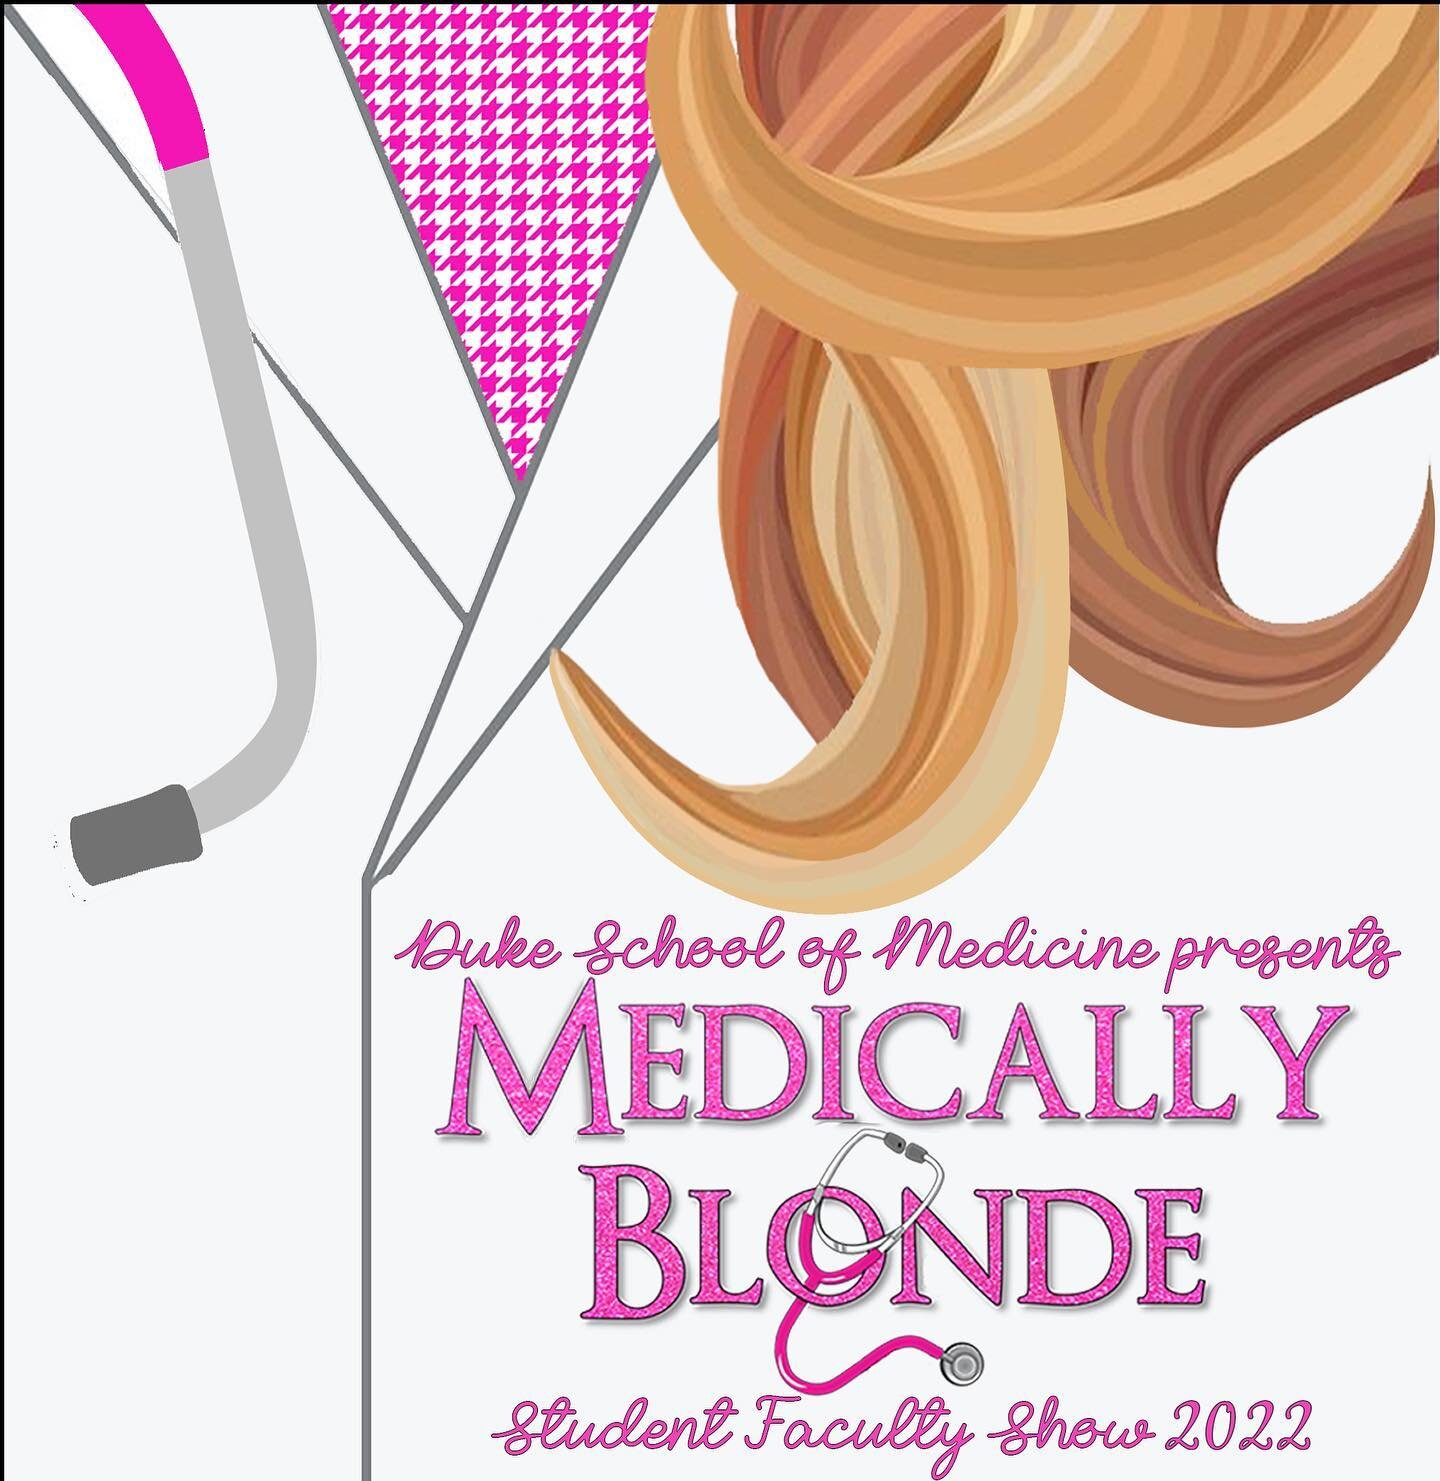 We are very excited to debut our Medically Blonde artwork!! There is still time to buy in person or livestream tickets for the show, which is on March 4th at 7pm on Duke&rsquo;s campus. Get tickets at tickets.Duke.edu! Check out our website for more 